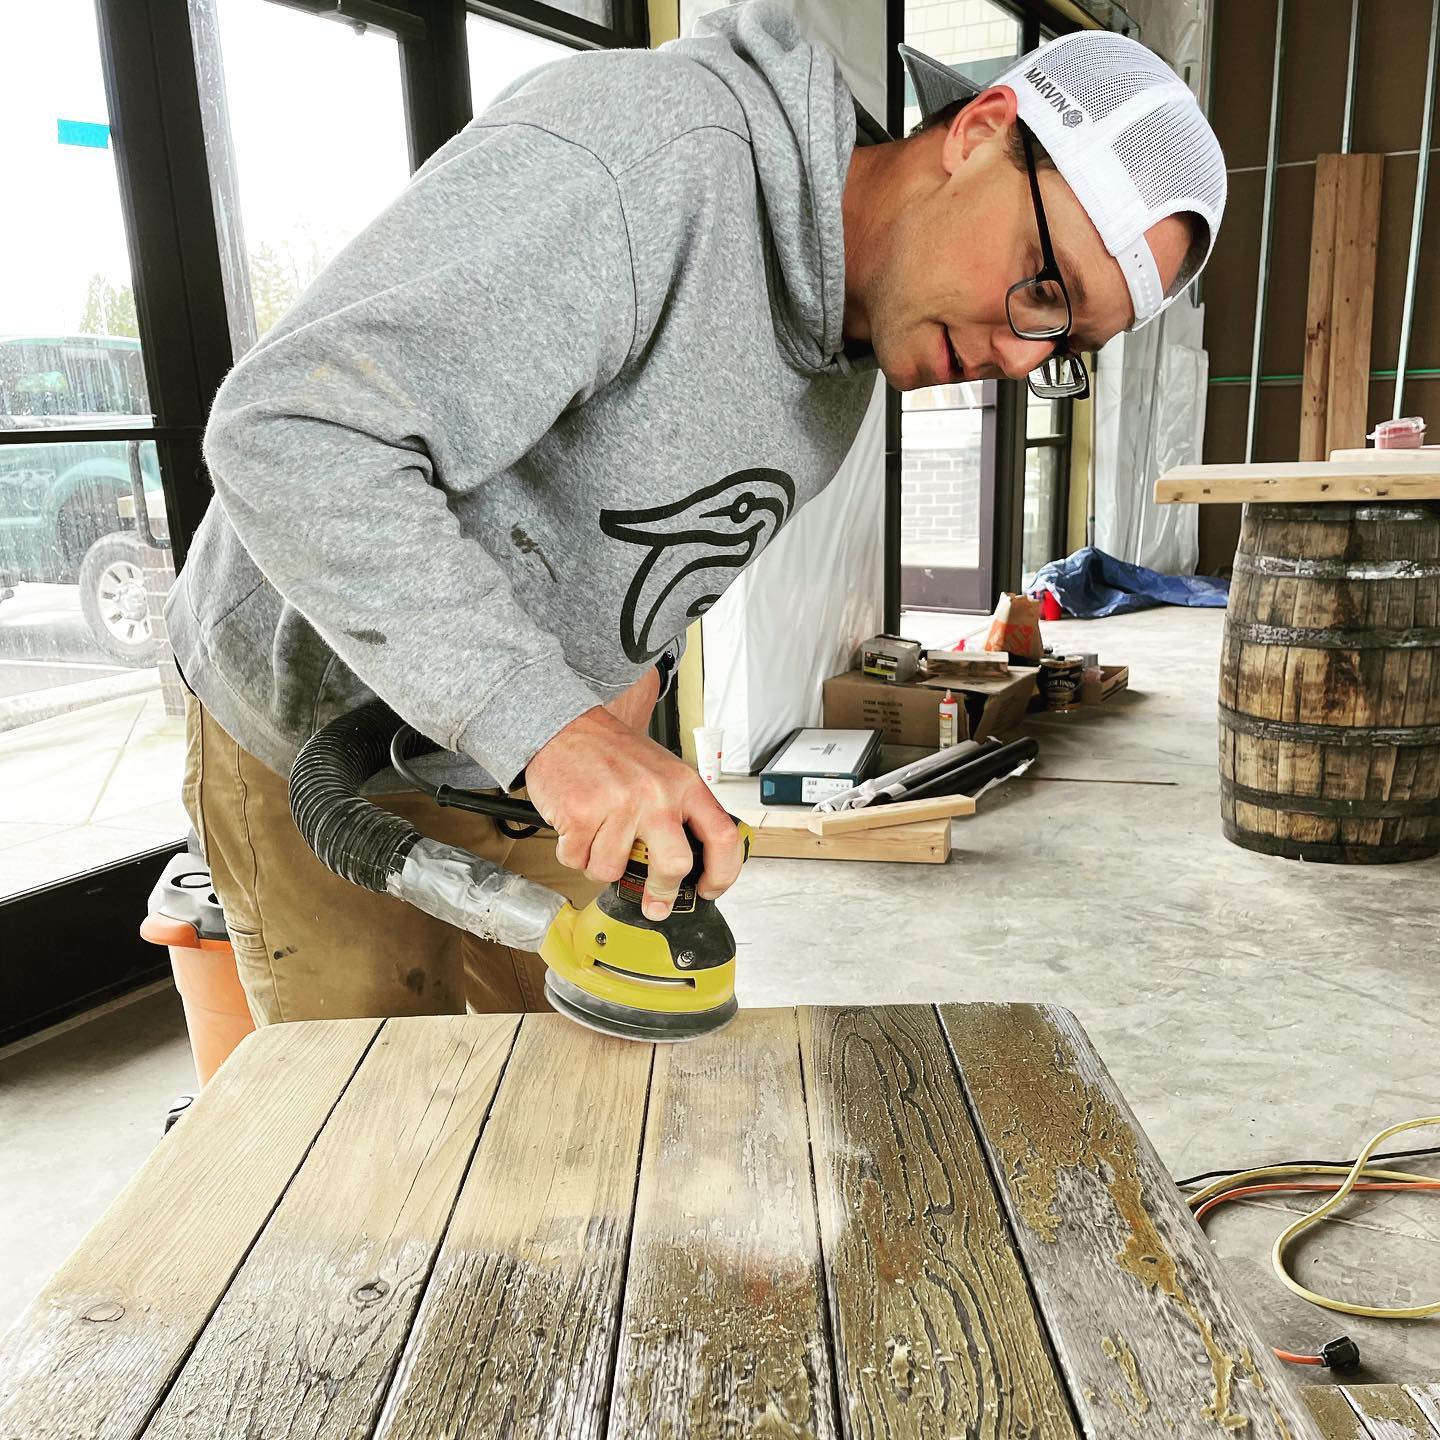 Our patio tables have needed to be sanded and refinished for a LONG time. So if you notice them missing, don’t worry, they will be back very soon. 
.
.
.
.
.
#wildwoodtaphouse #wildwood #wildwoodtap #patiotables #doinwork